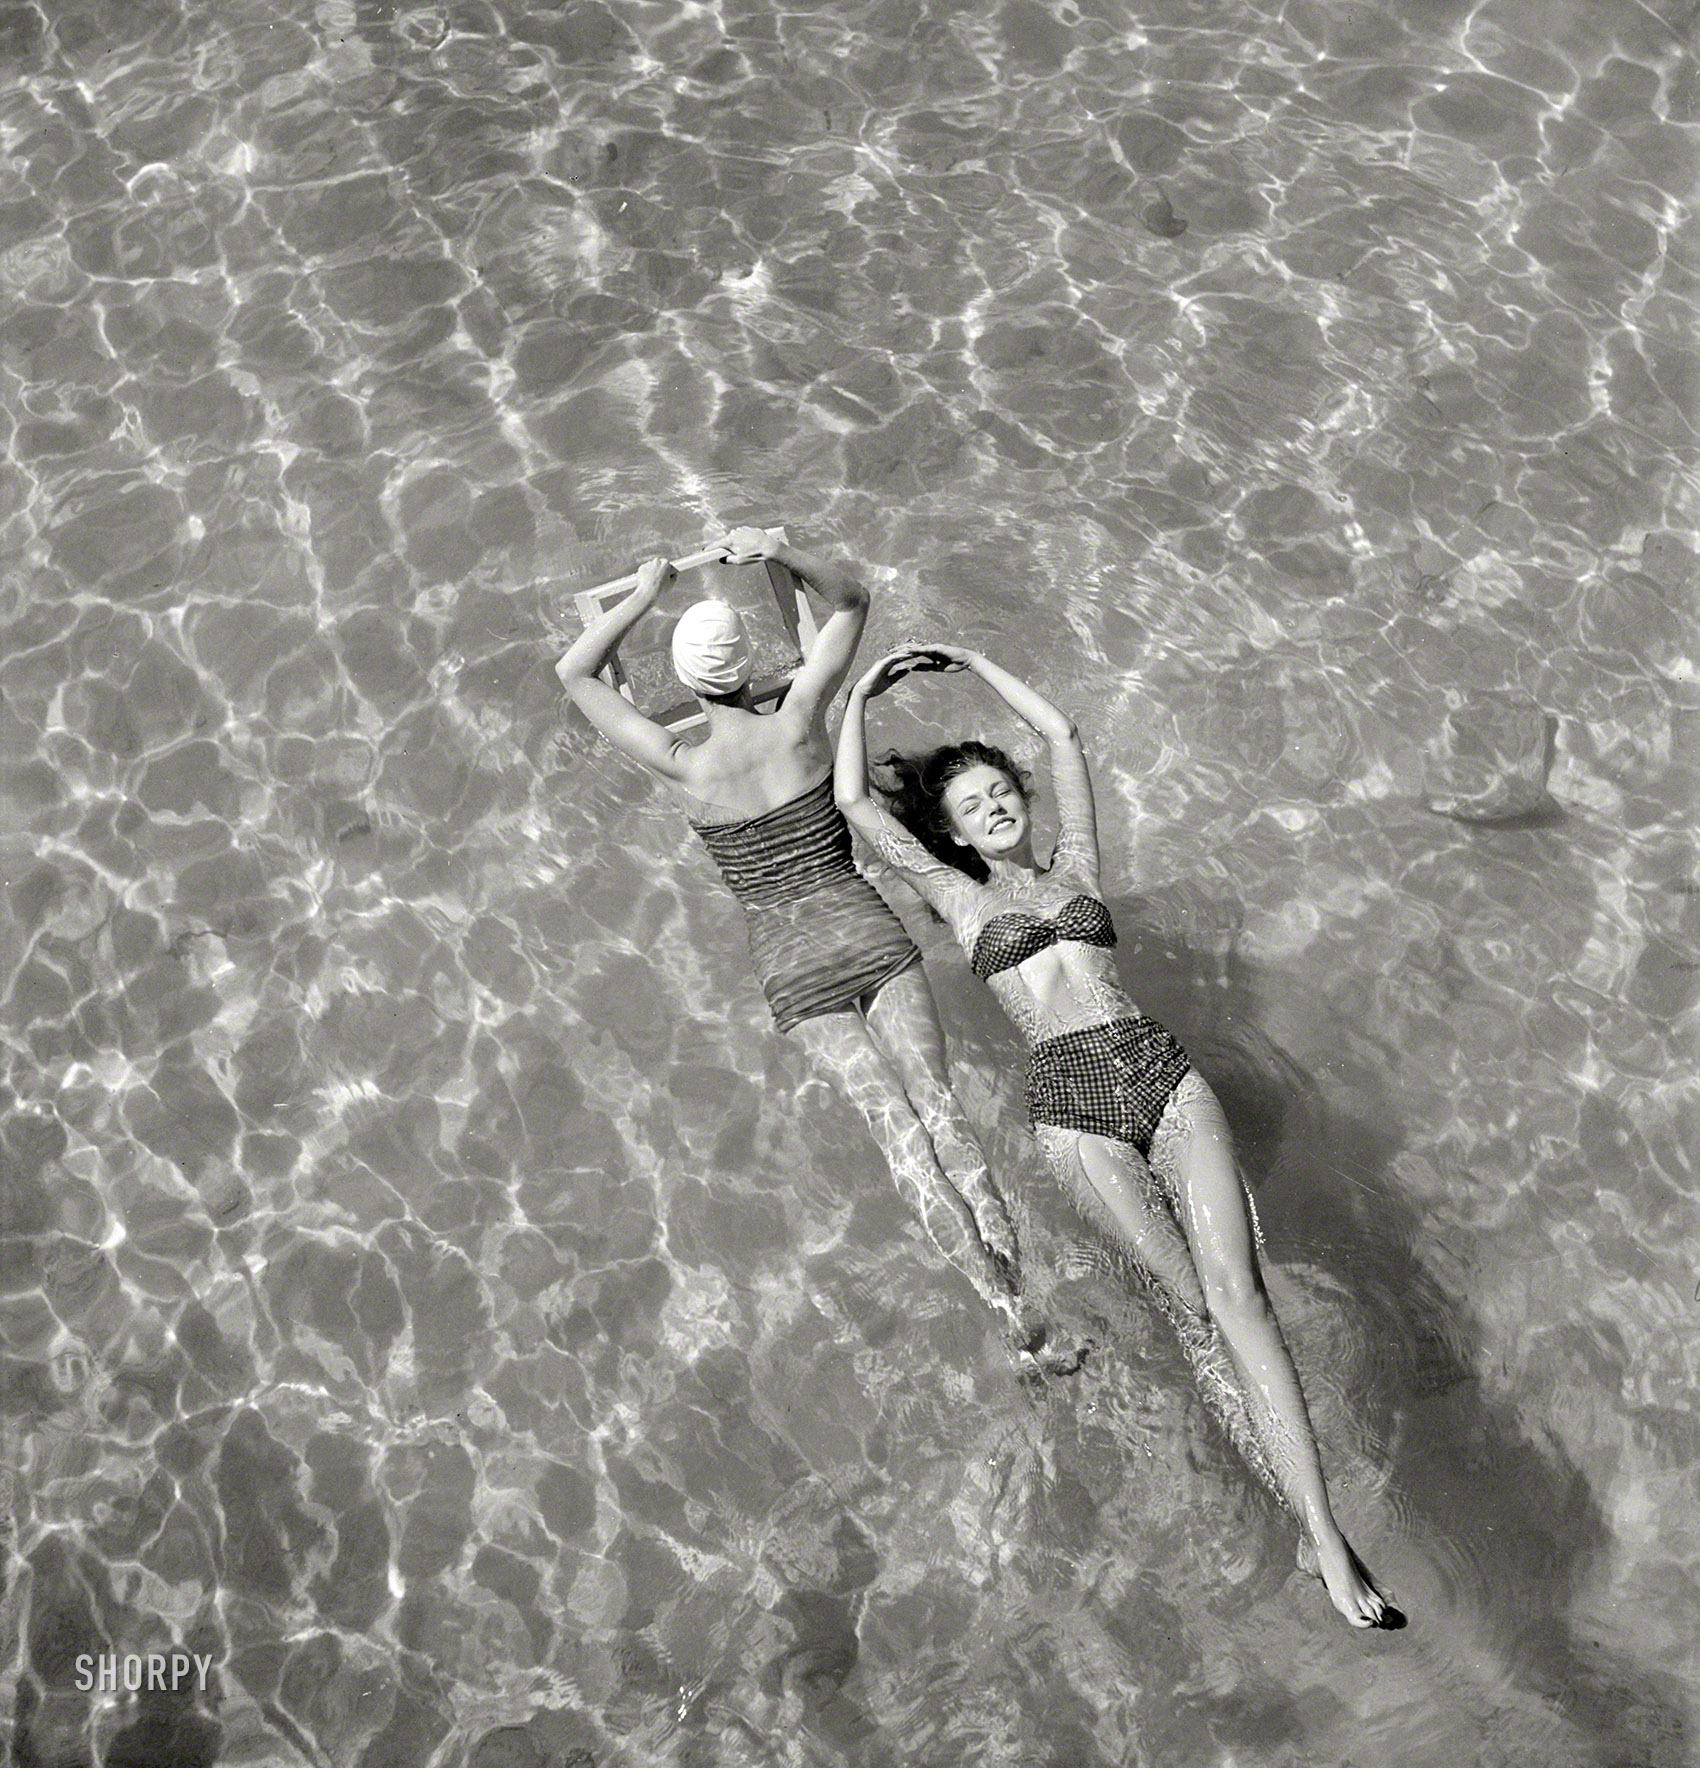 October 1948. "Bathing suit models in swimming pool." Bikini much? Not atoll. Anyone seen my gingham handkerchief? Photo by Toni Frissell. View full size.